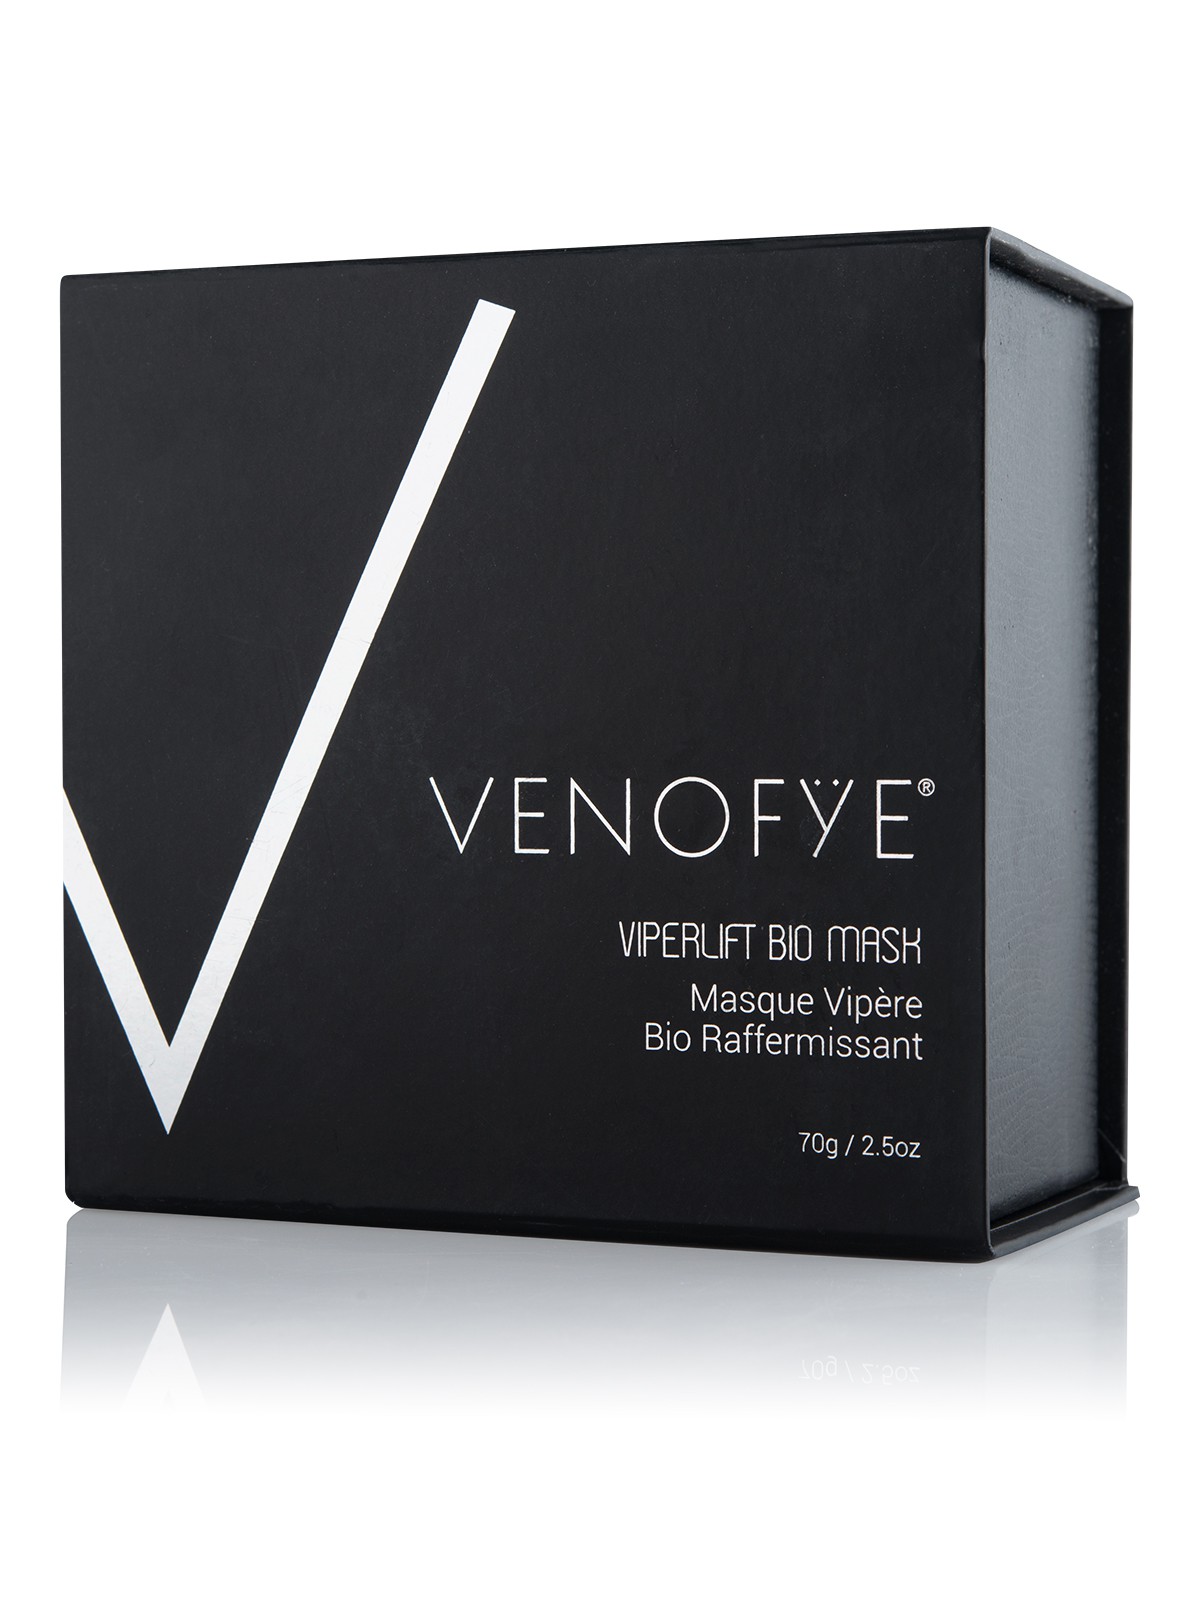 ViperLift Bio Mask in its case